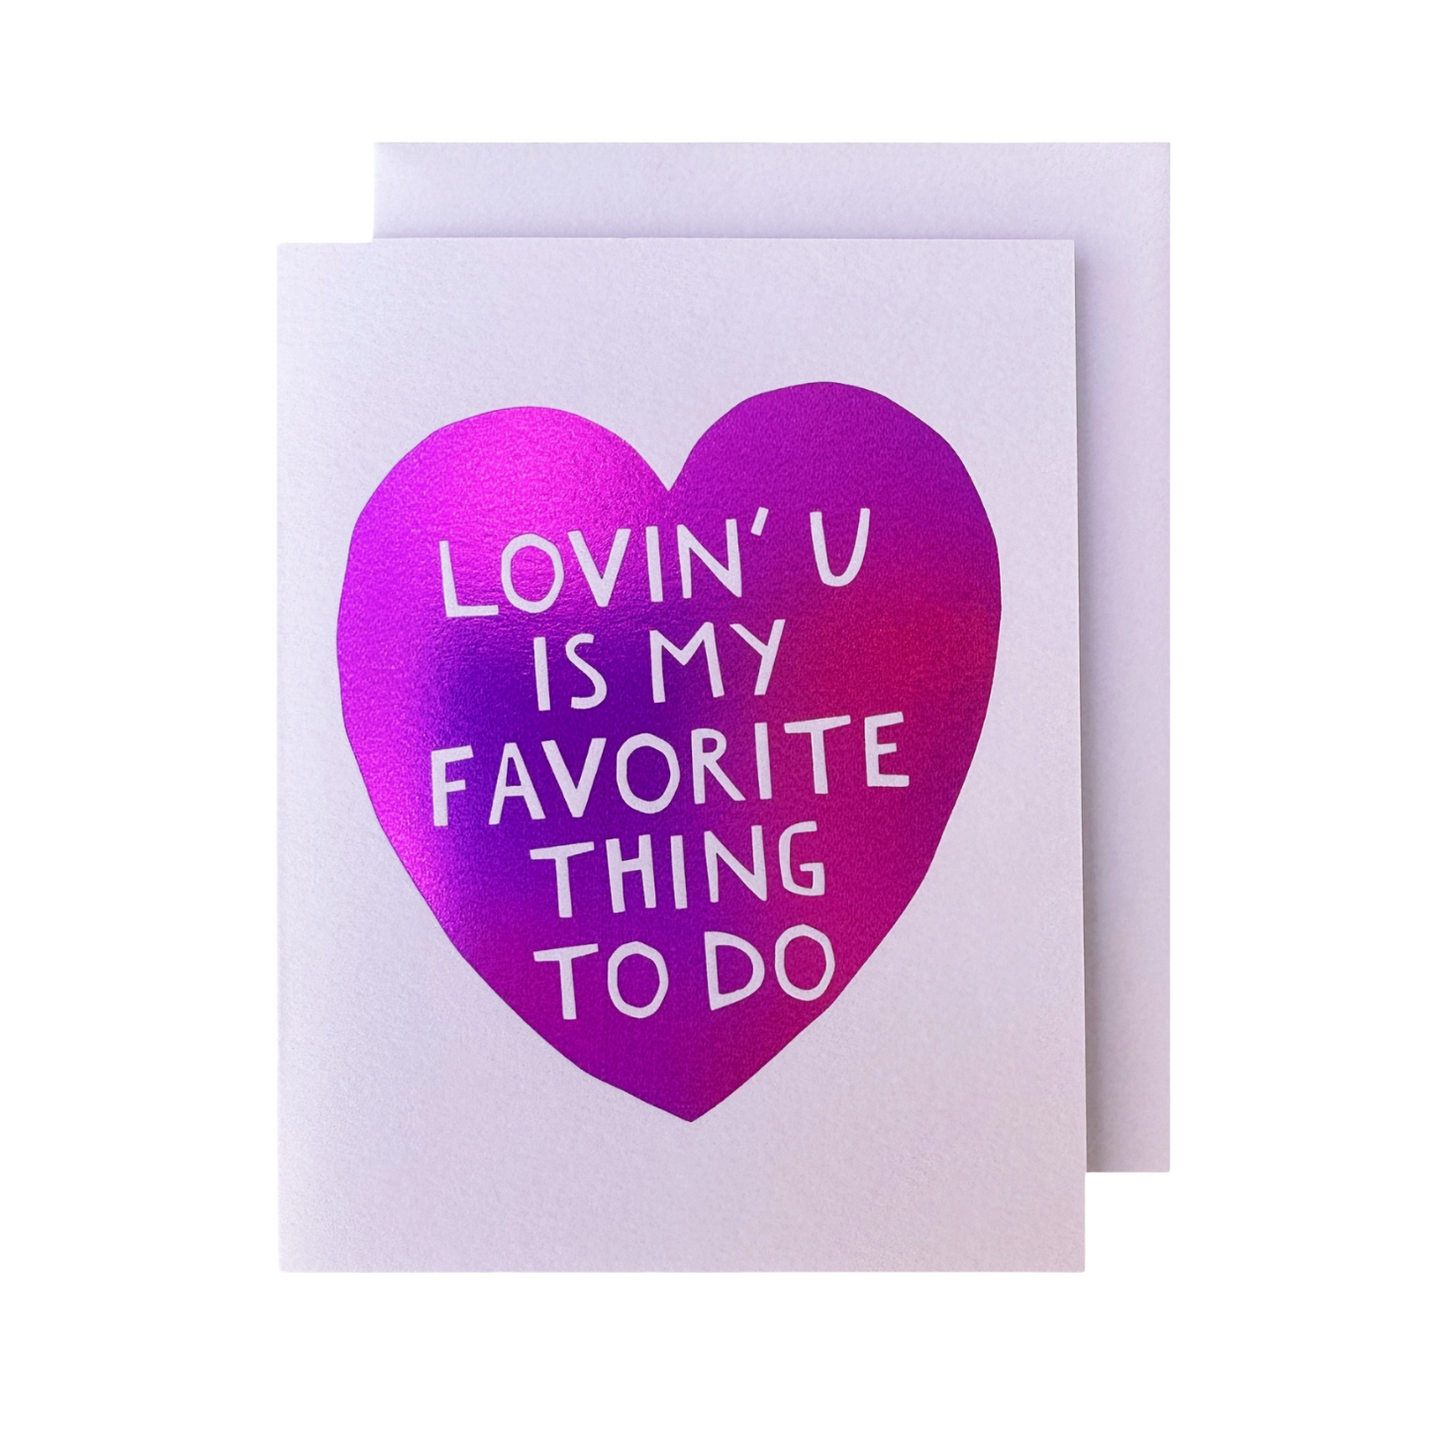 Lovin' You Card by The Social Type 